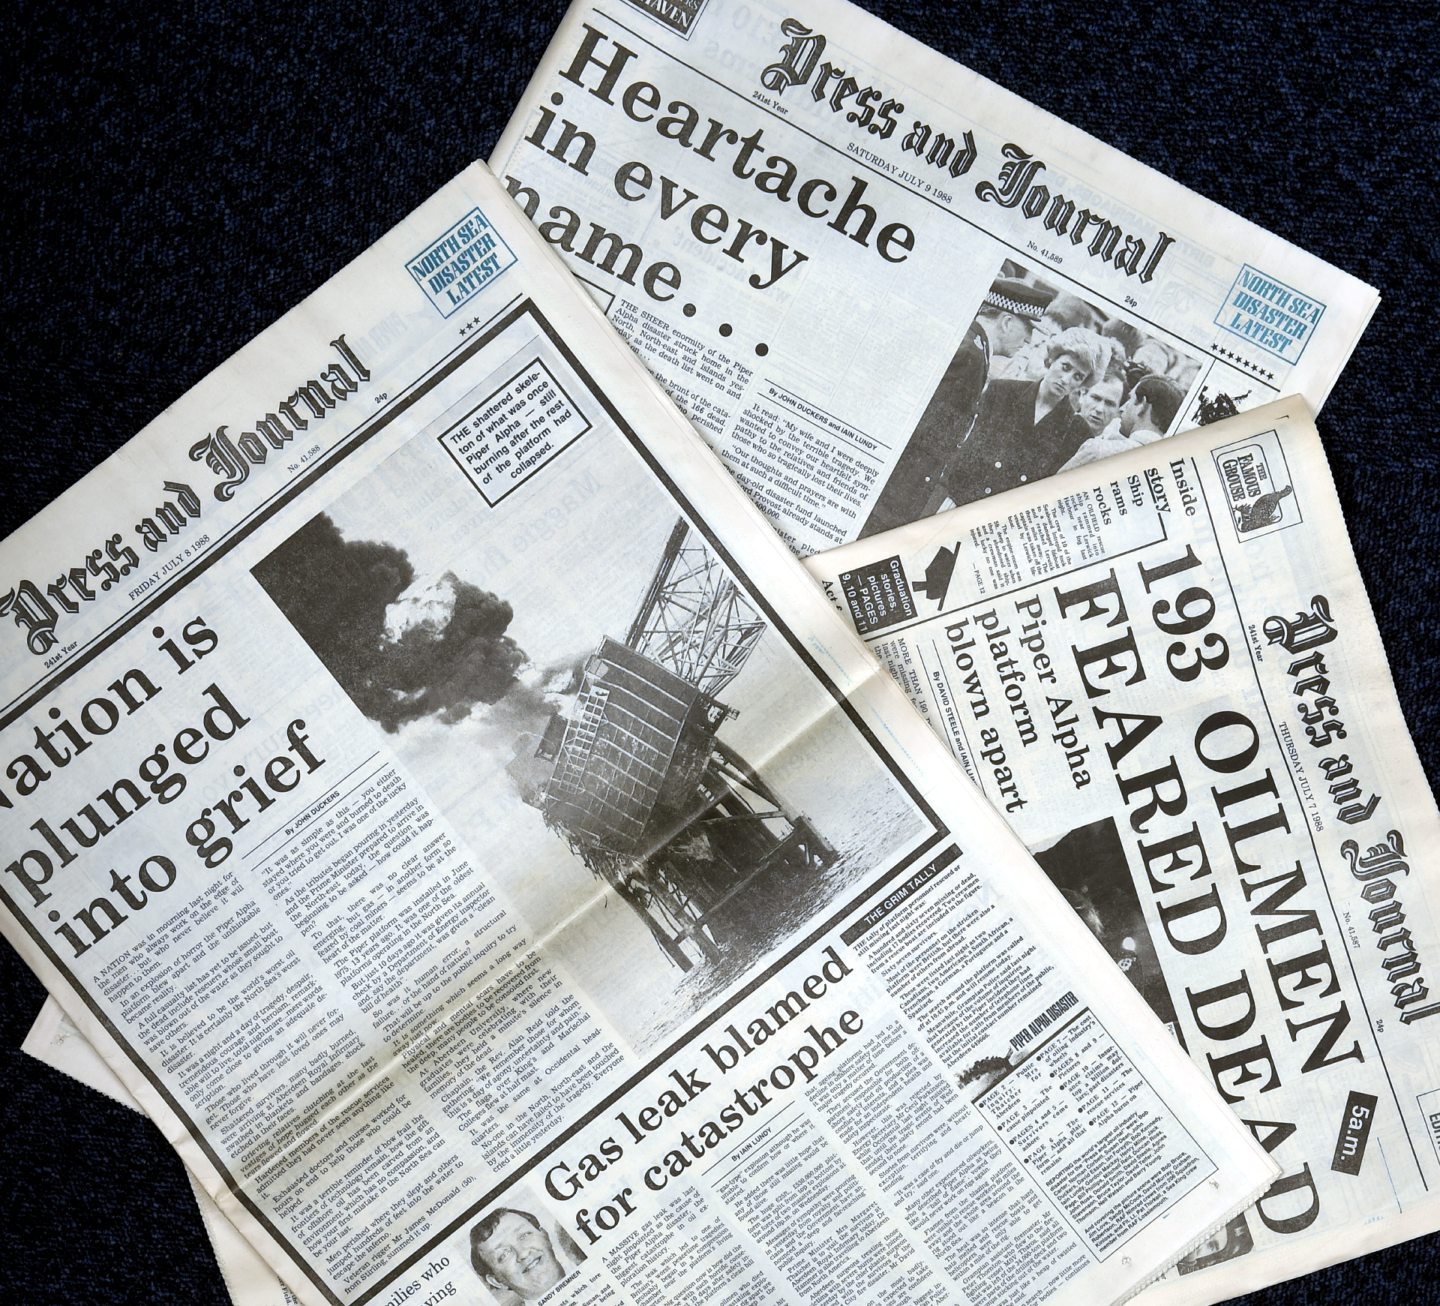 Copies of the Press and Journal, reporting on the 1988 story of the Piper Alpha platform in the north sea. In the picture are front page pages on Thursday the 7th, Friday the 8th of July and Saturday the 9th of July.